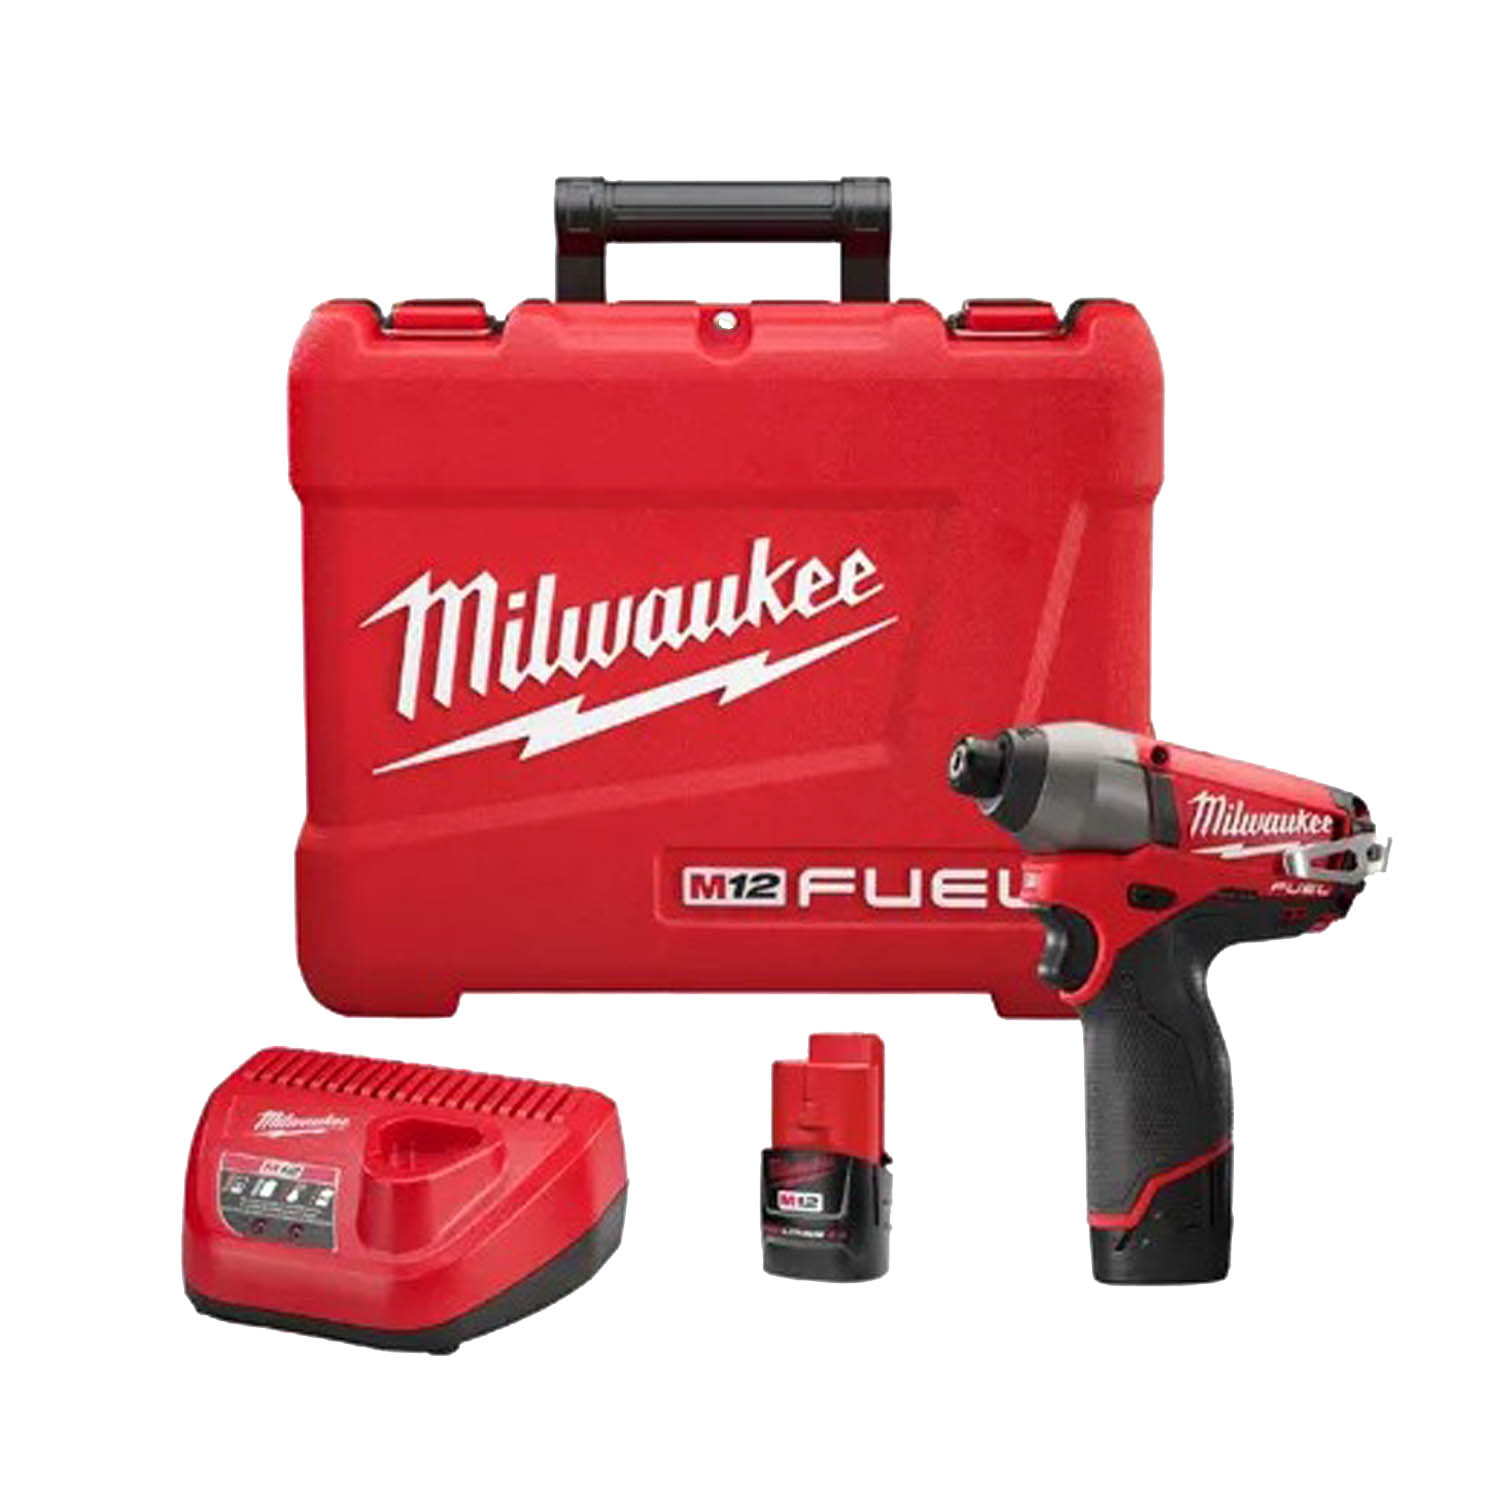 M12 FUEL 1/4 IN. HEX IMPACT DRIVER KIT